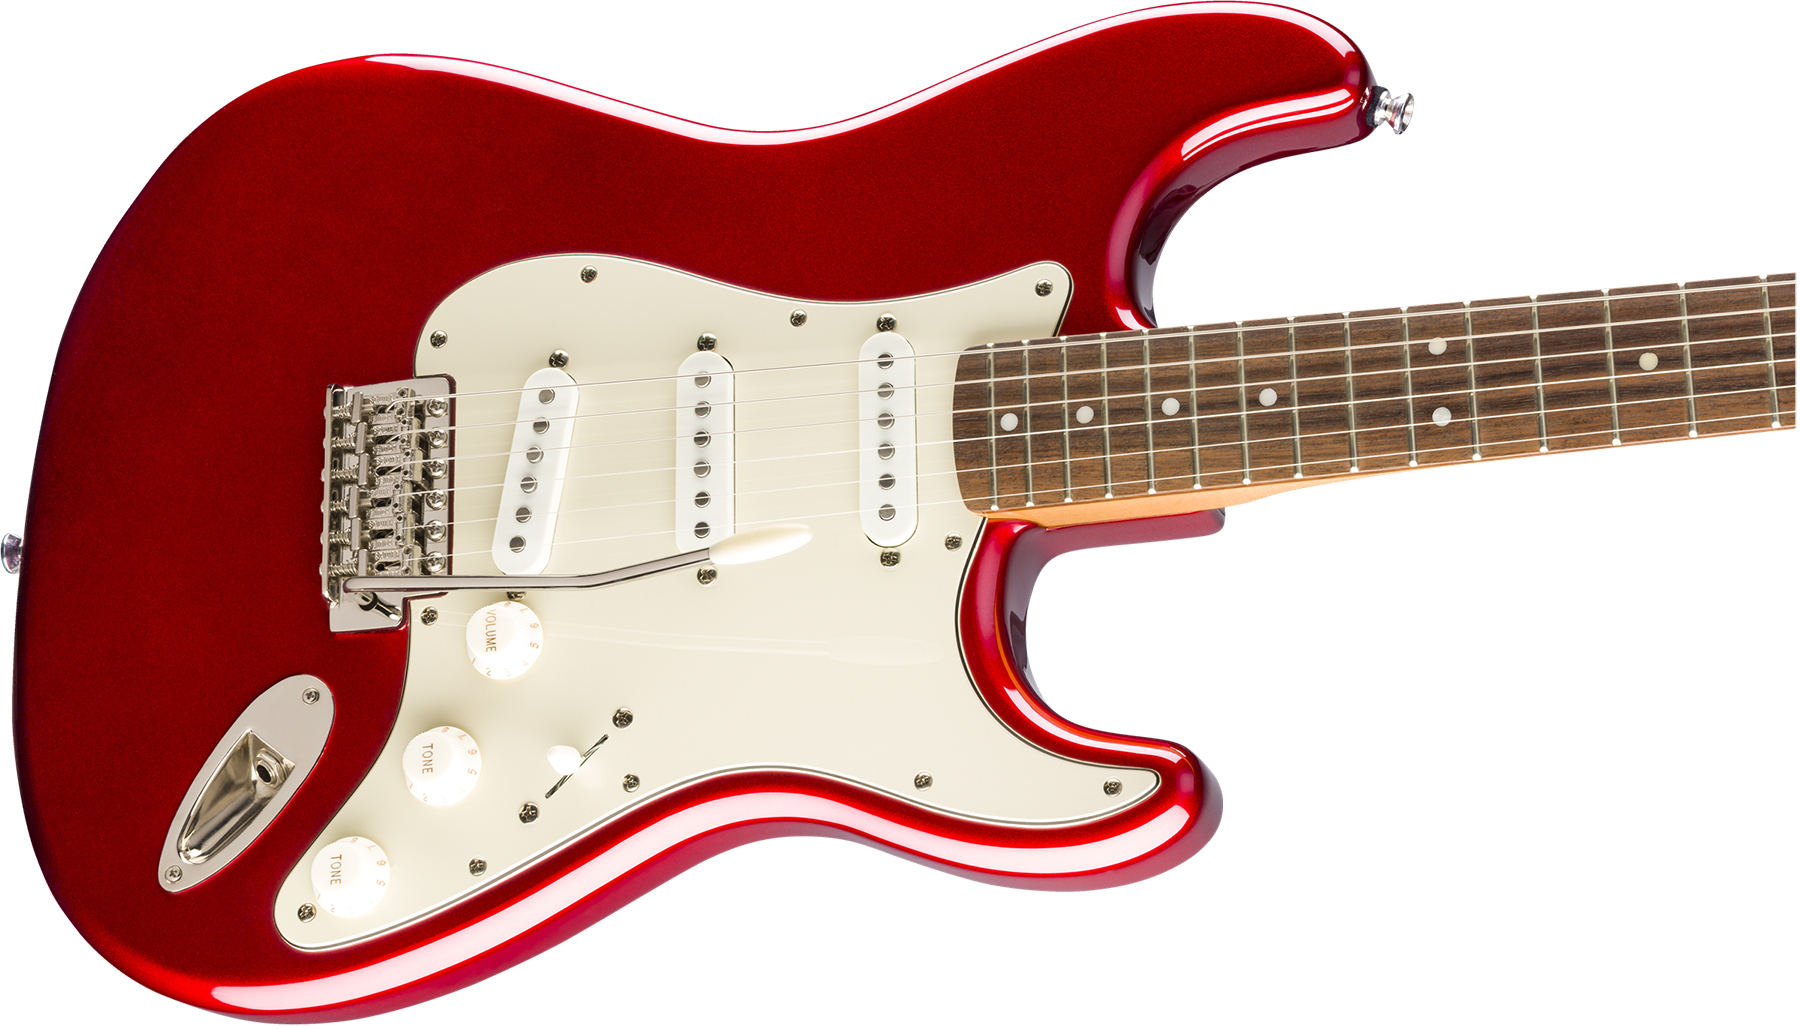 Squier Strat '60s Classic Vibe 2019 Lau 2019 - Candy Apple Red - Str shape electric guitar - Variation 2